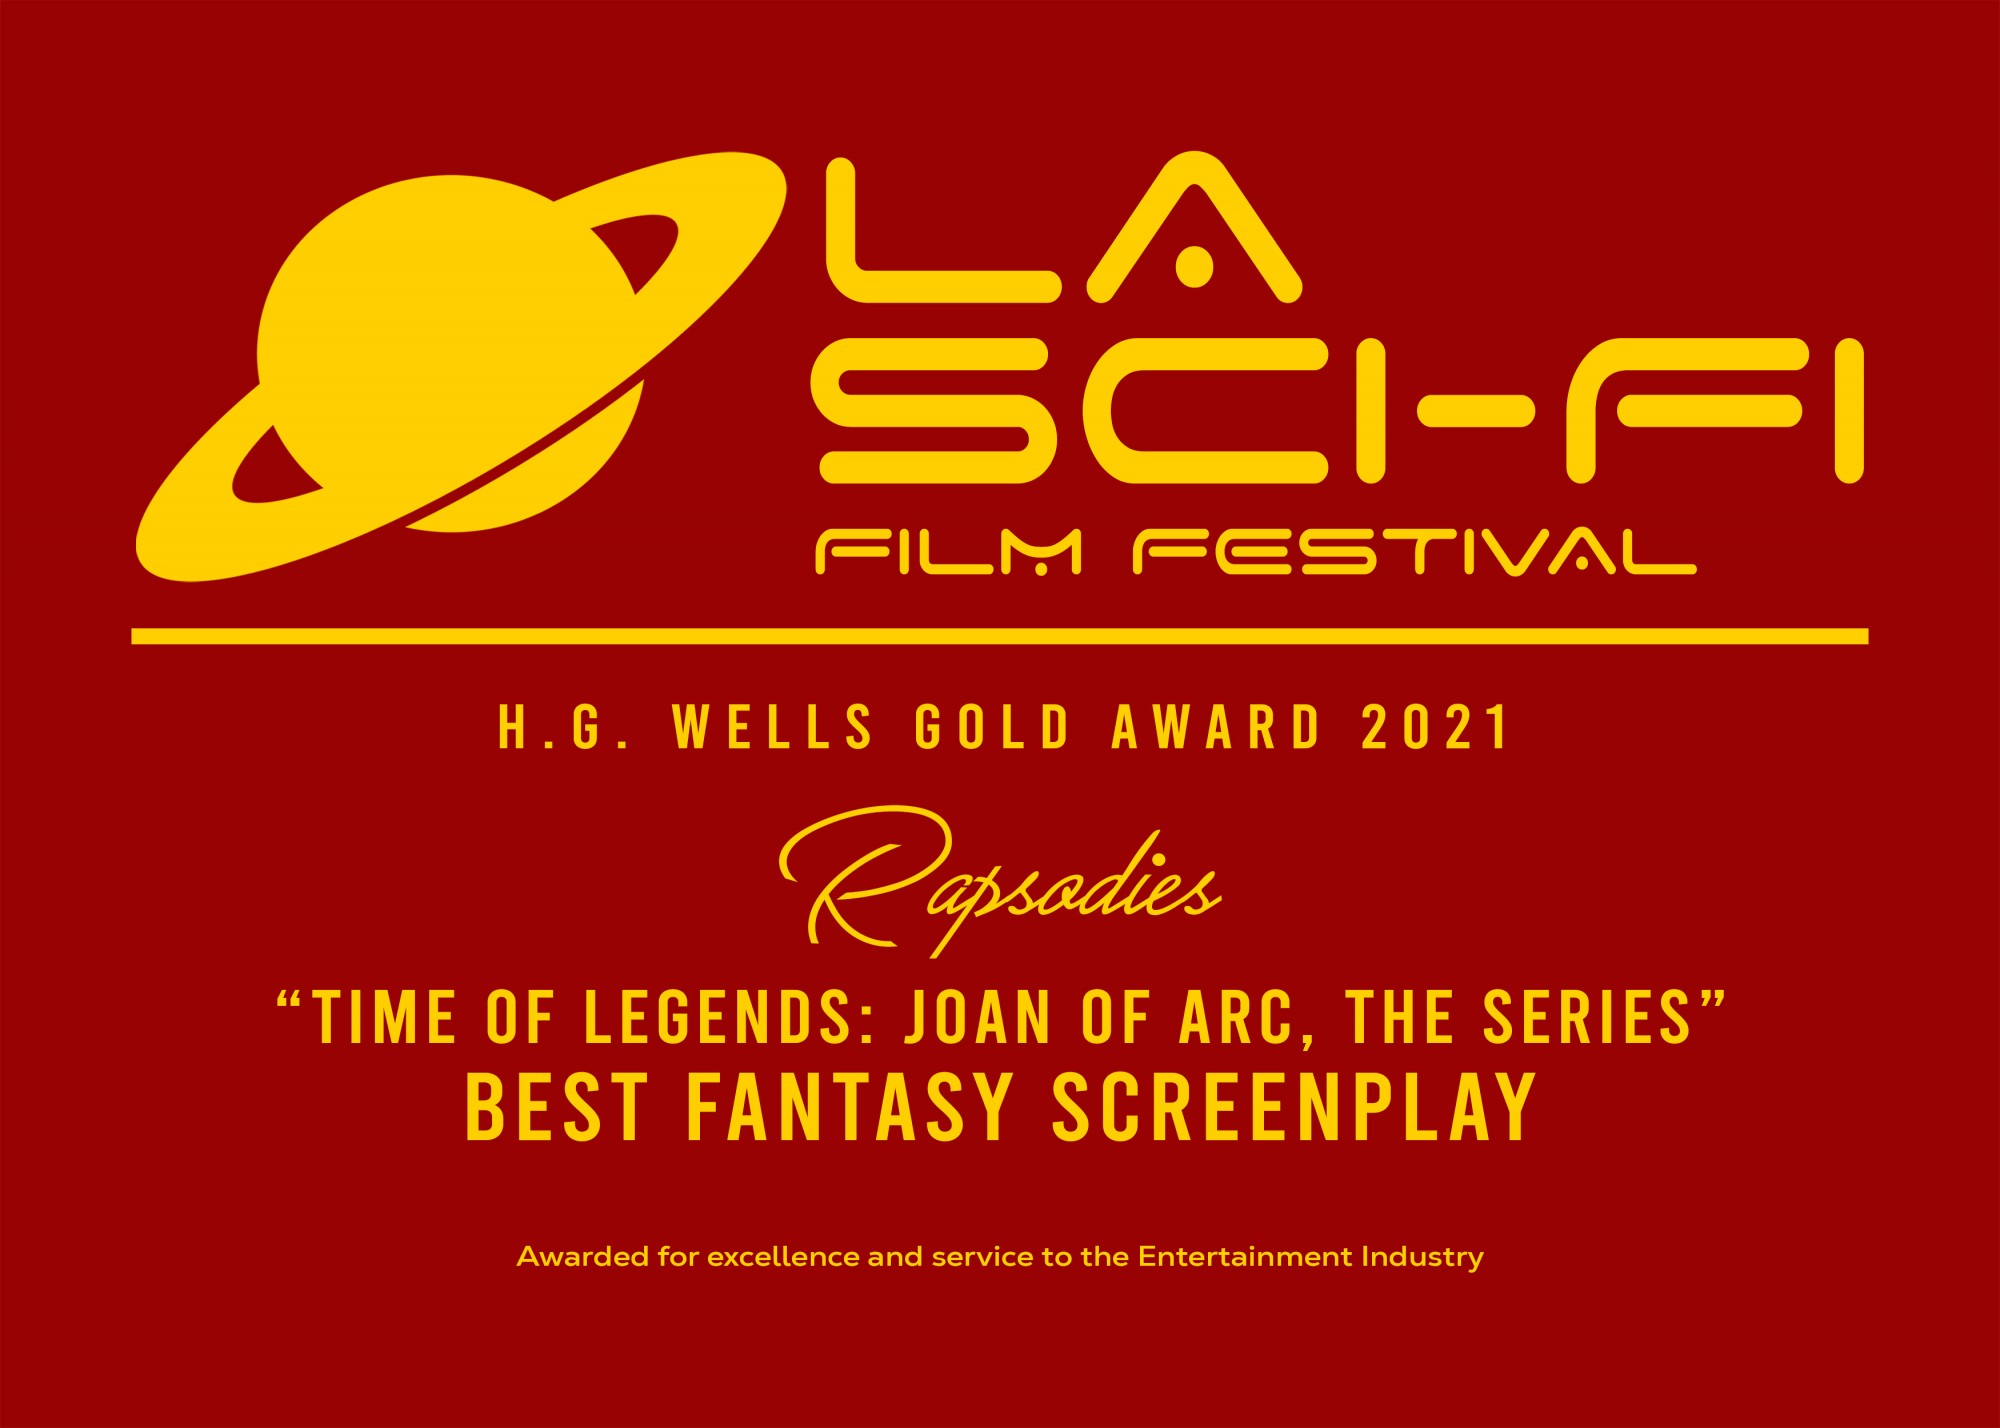 Time of Legends : Joan of Arc - H.G. Wells Gold Award 2021 - Best Fantasy Screenplay